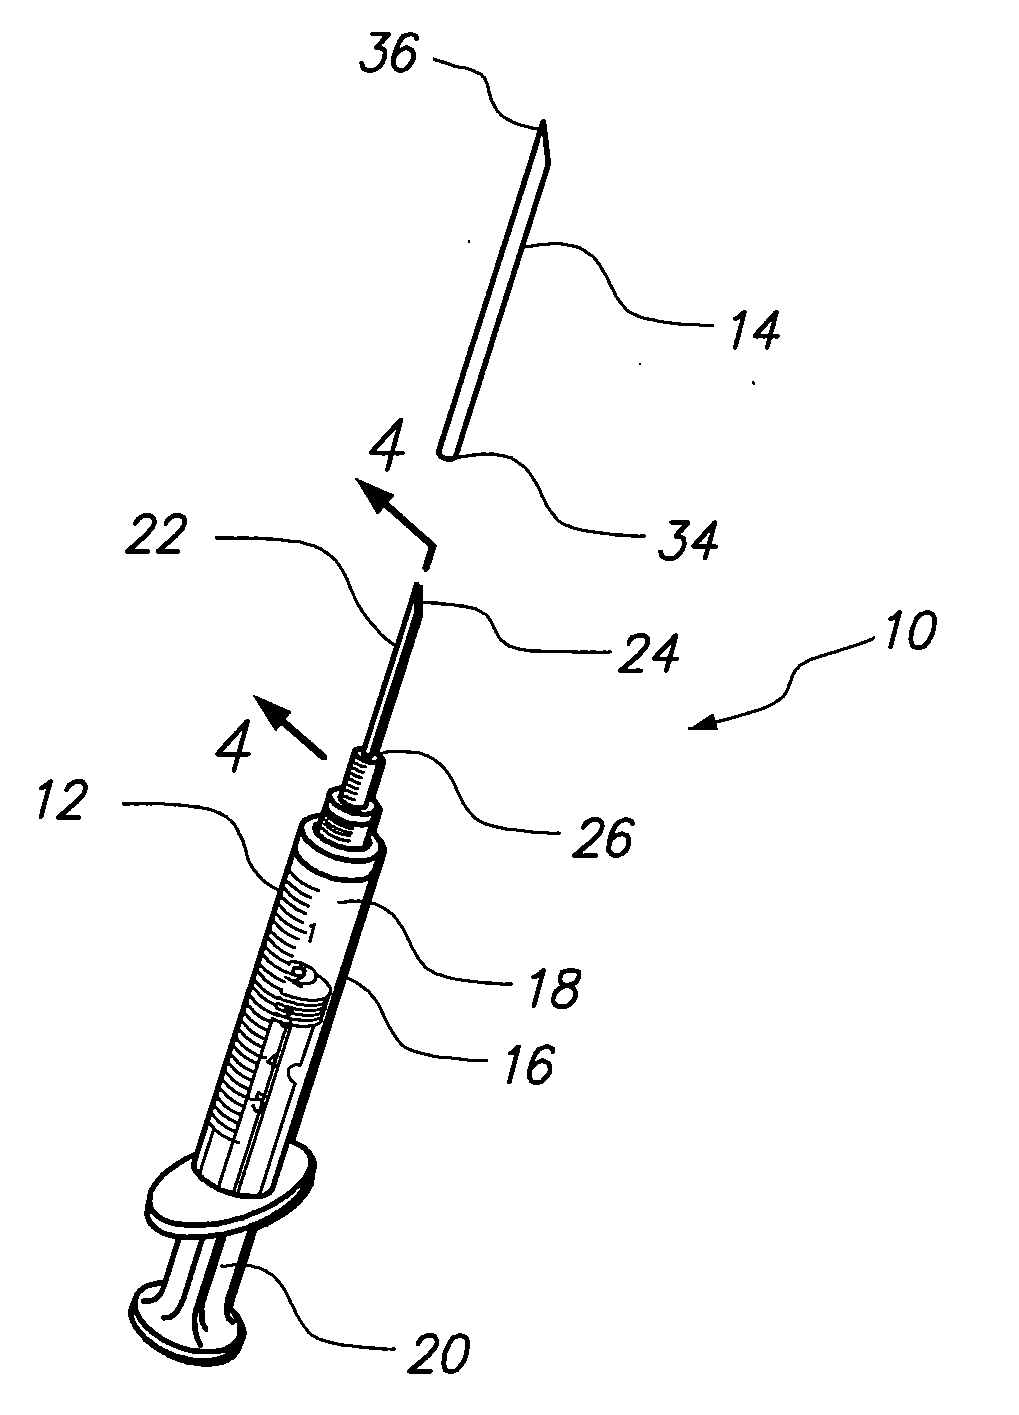 Hypodermic needle tip protector